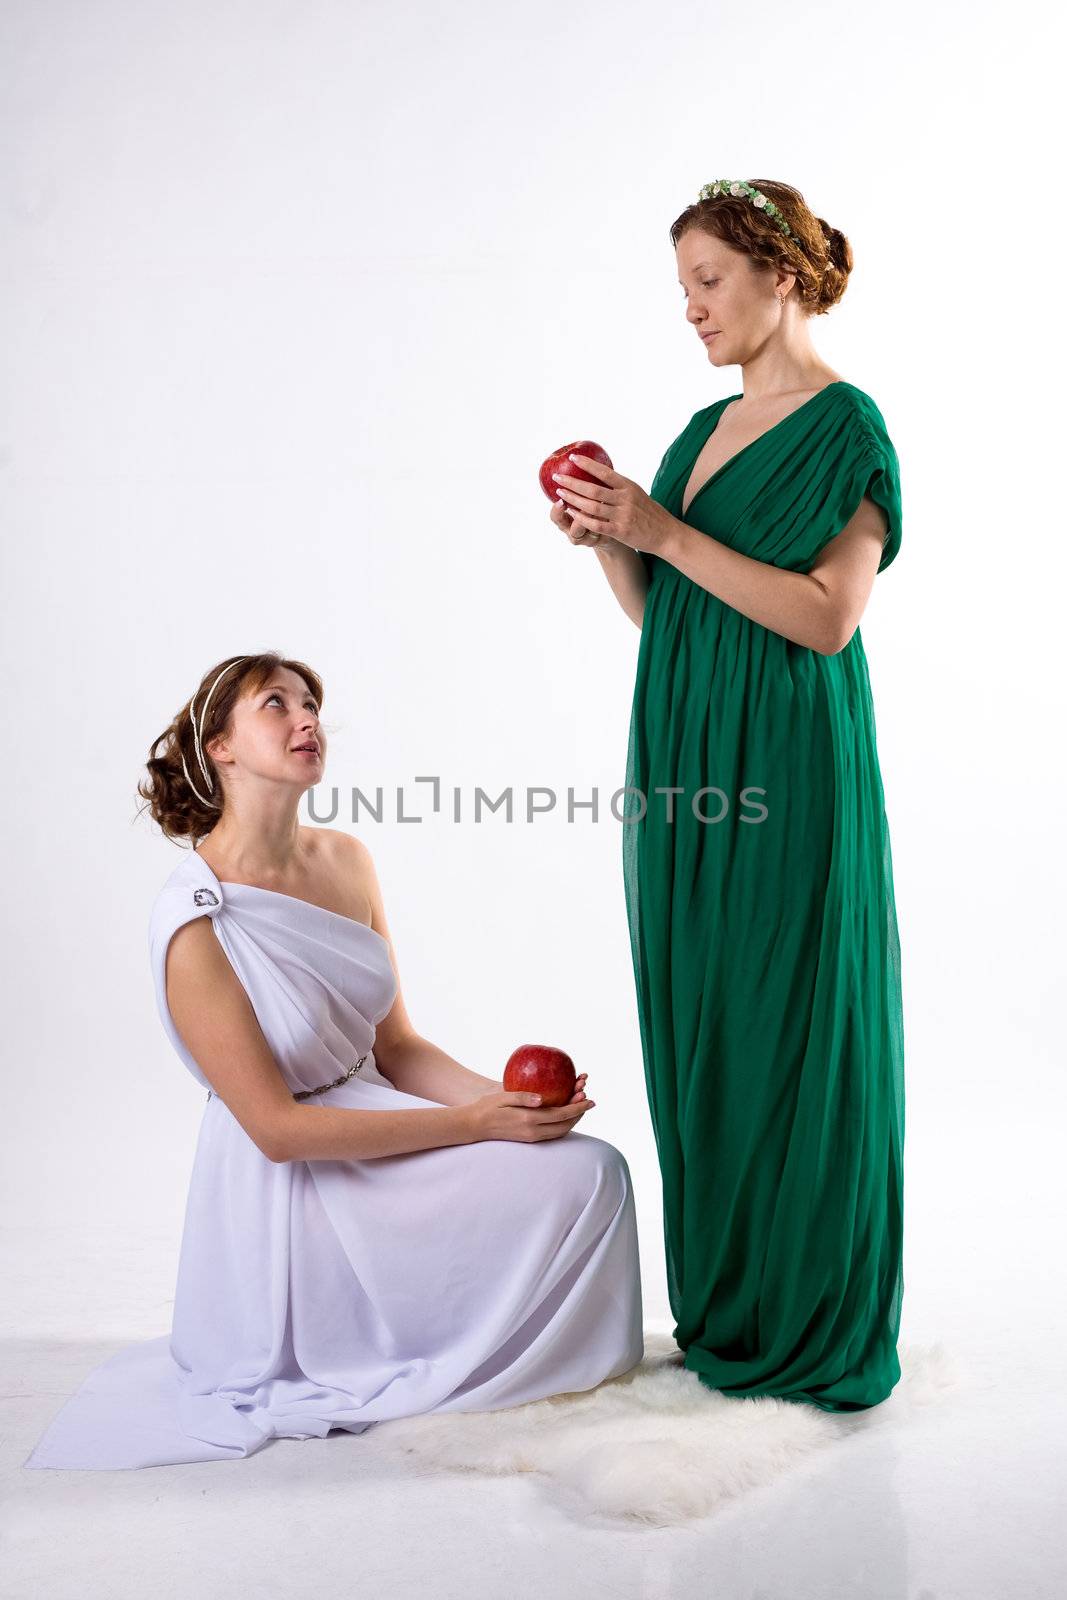 Two ladies and two apples by foaloce